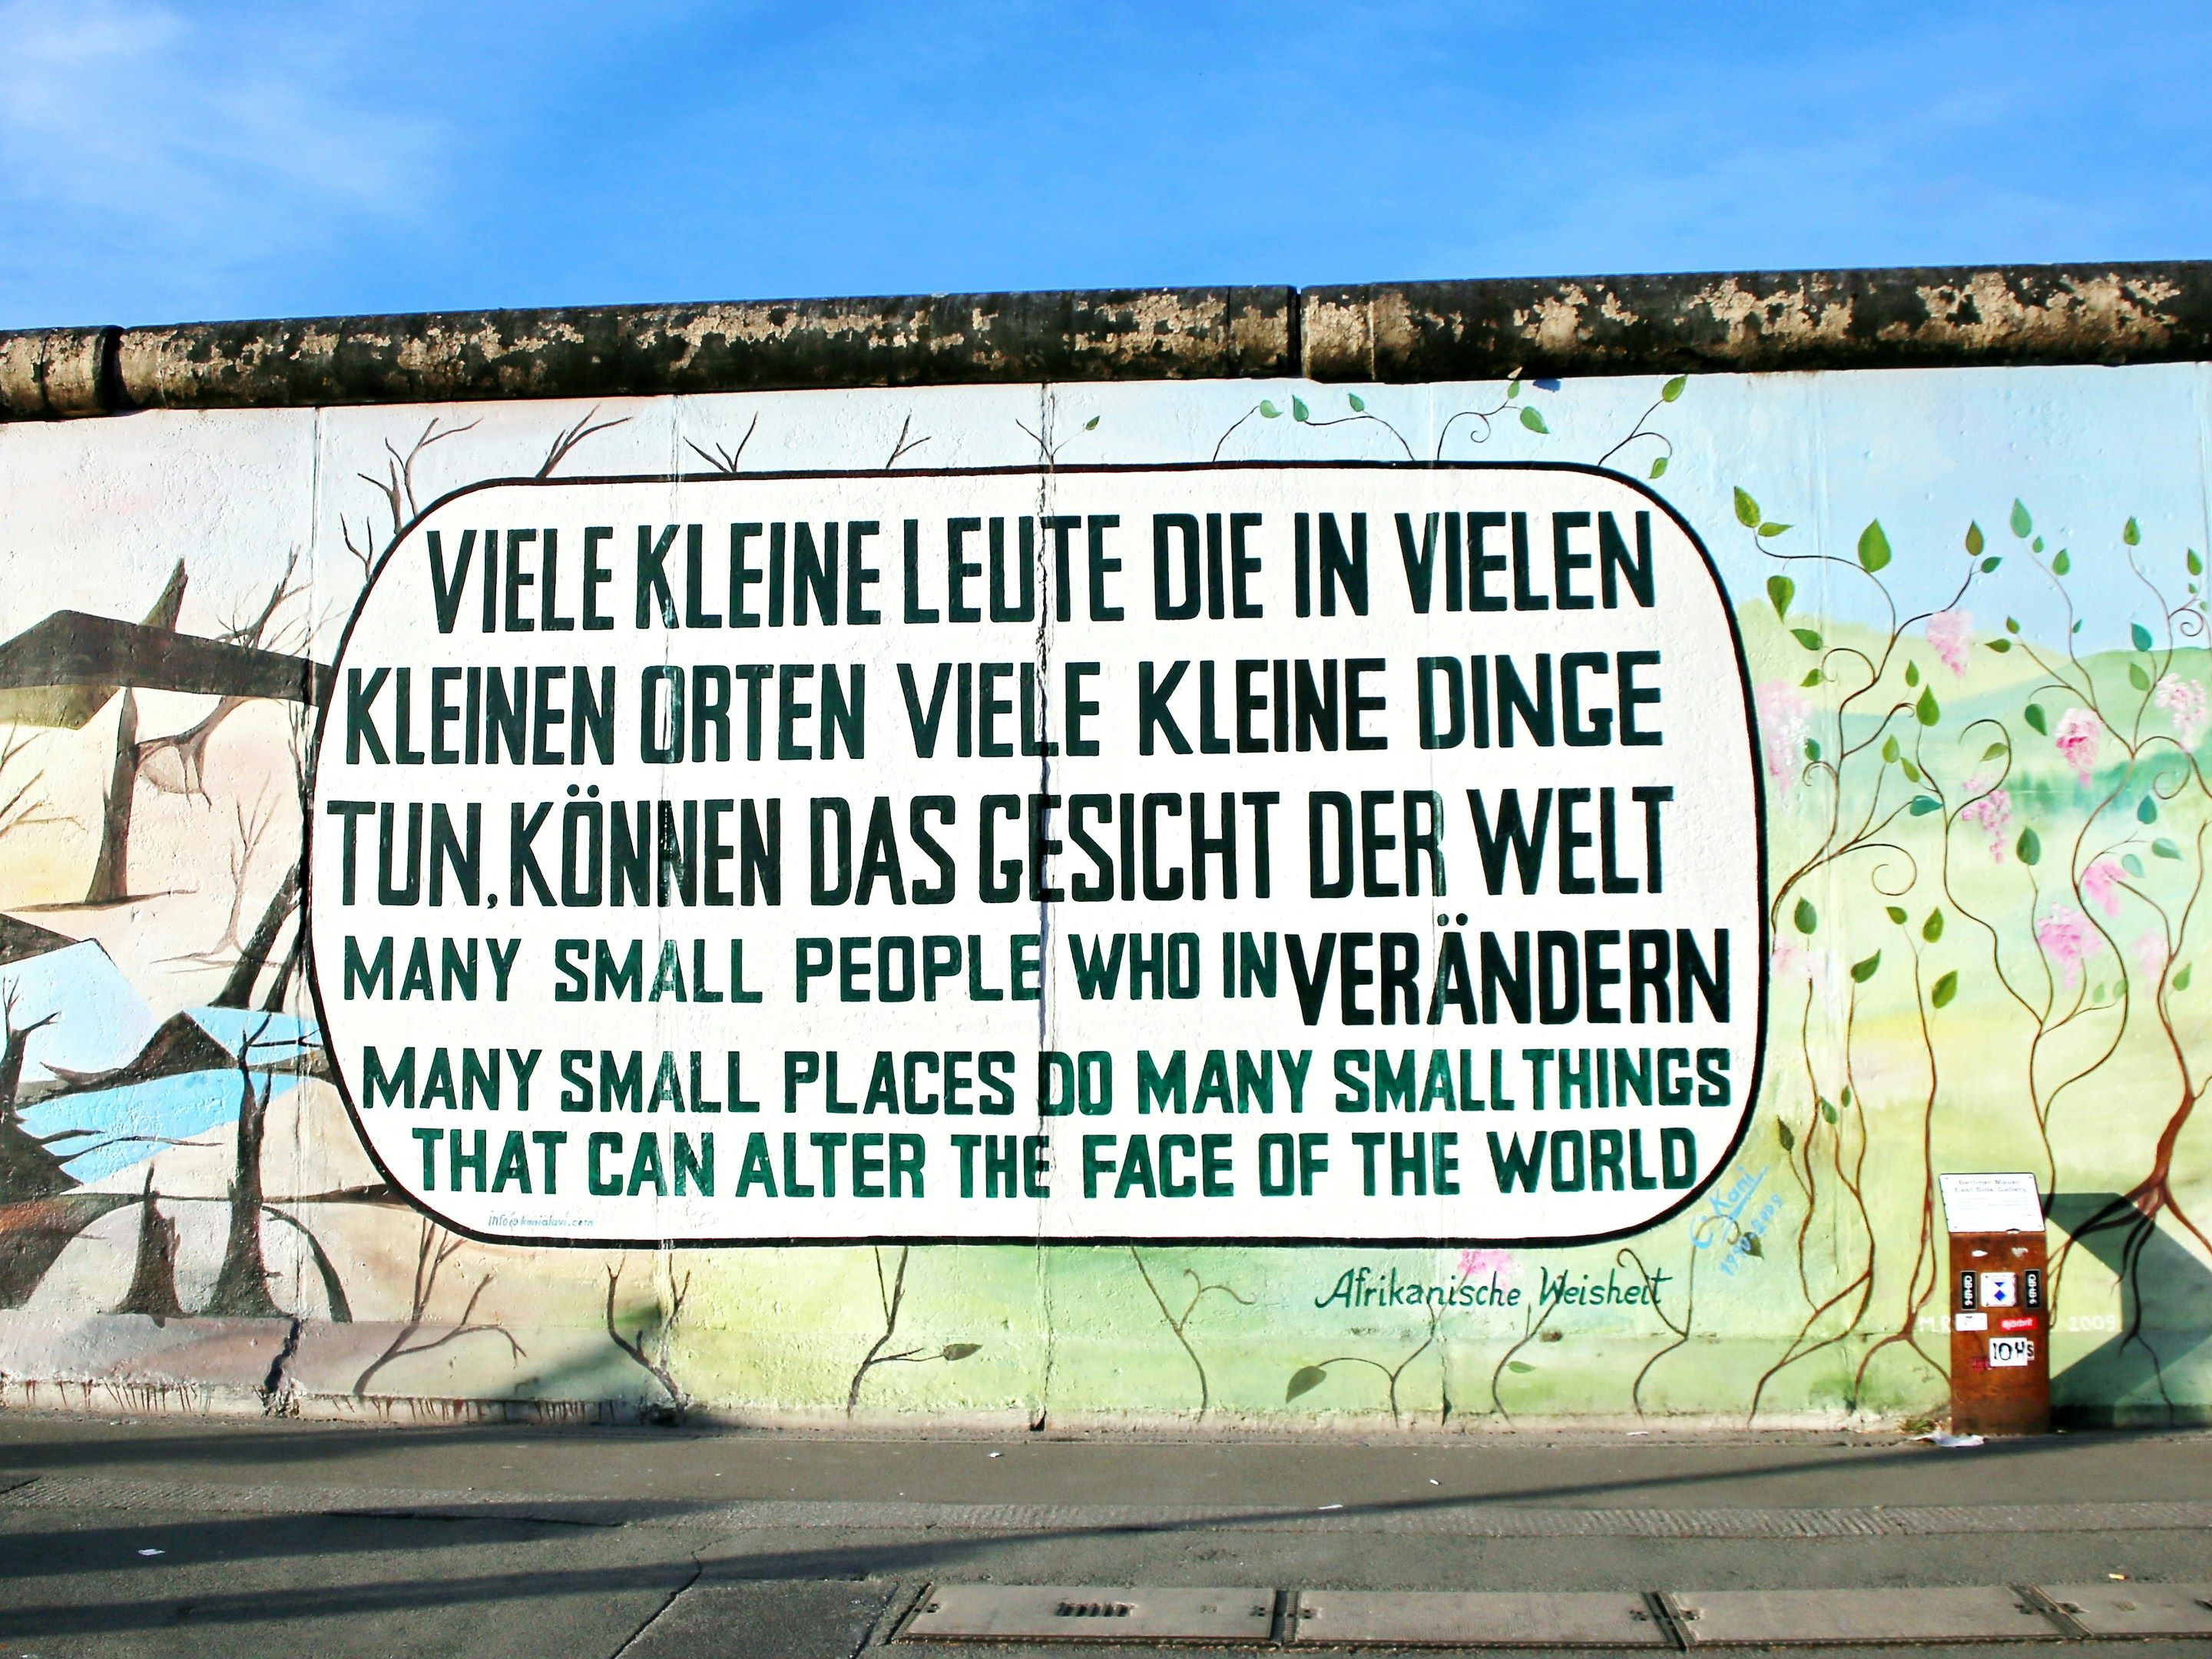 A graffiti wall in Germany encouraging climate action, and tying it to social and economic transformation, by emphasising many small changes.